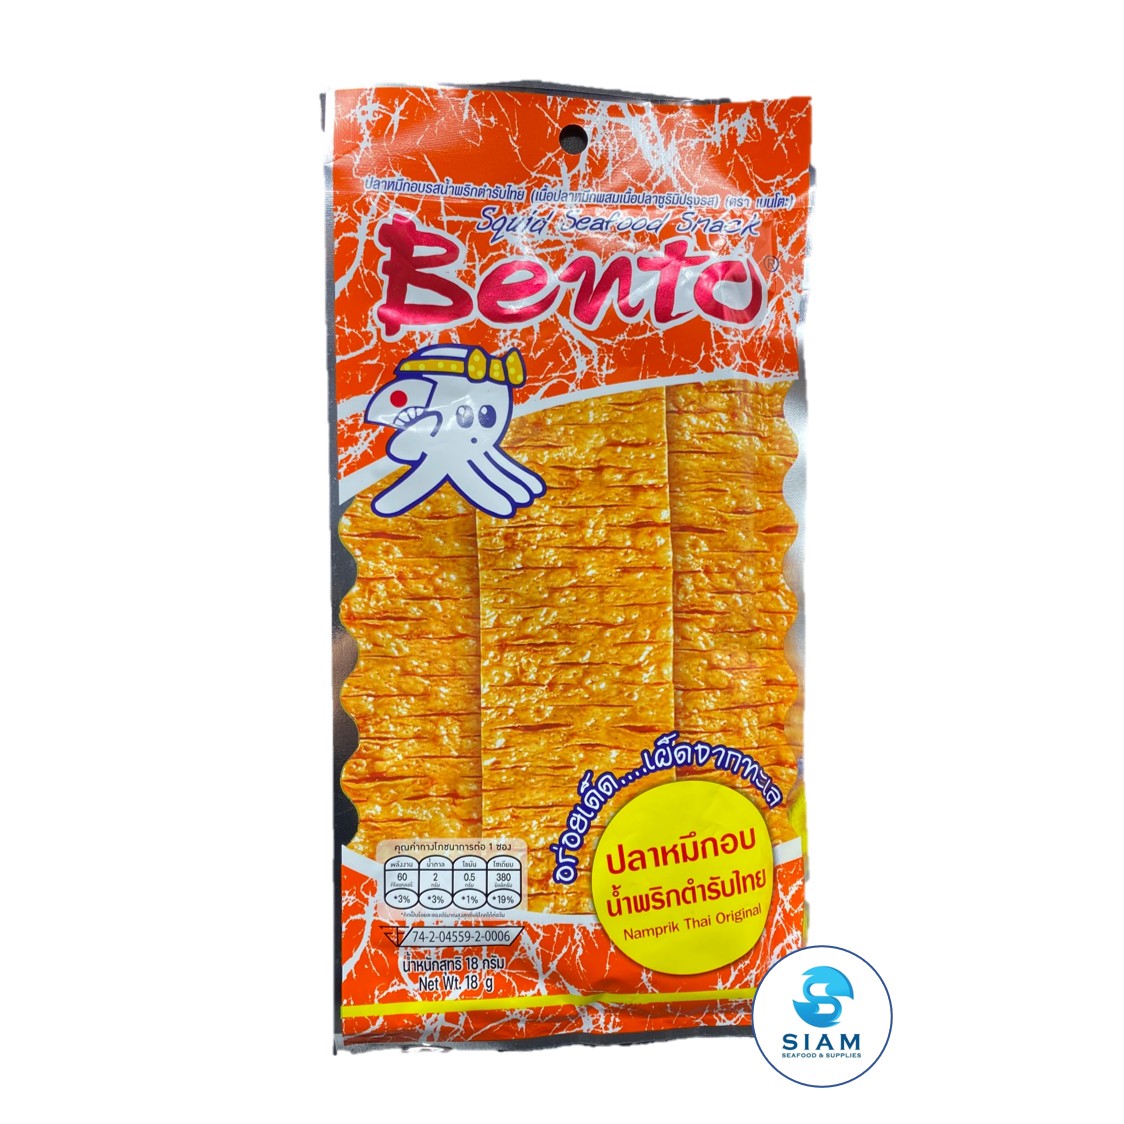 Bento Squid Seafood Snack Hot & Spicy 0.7oz, (3 Pack)